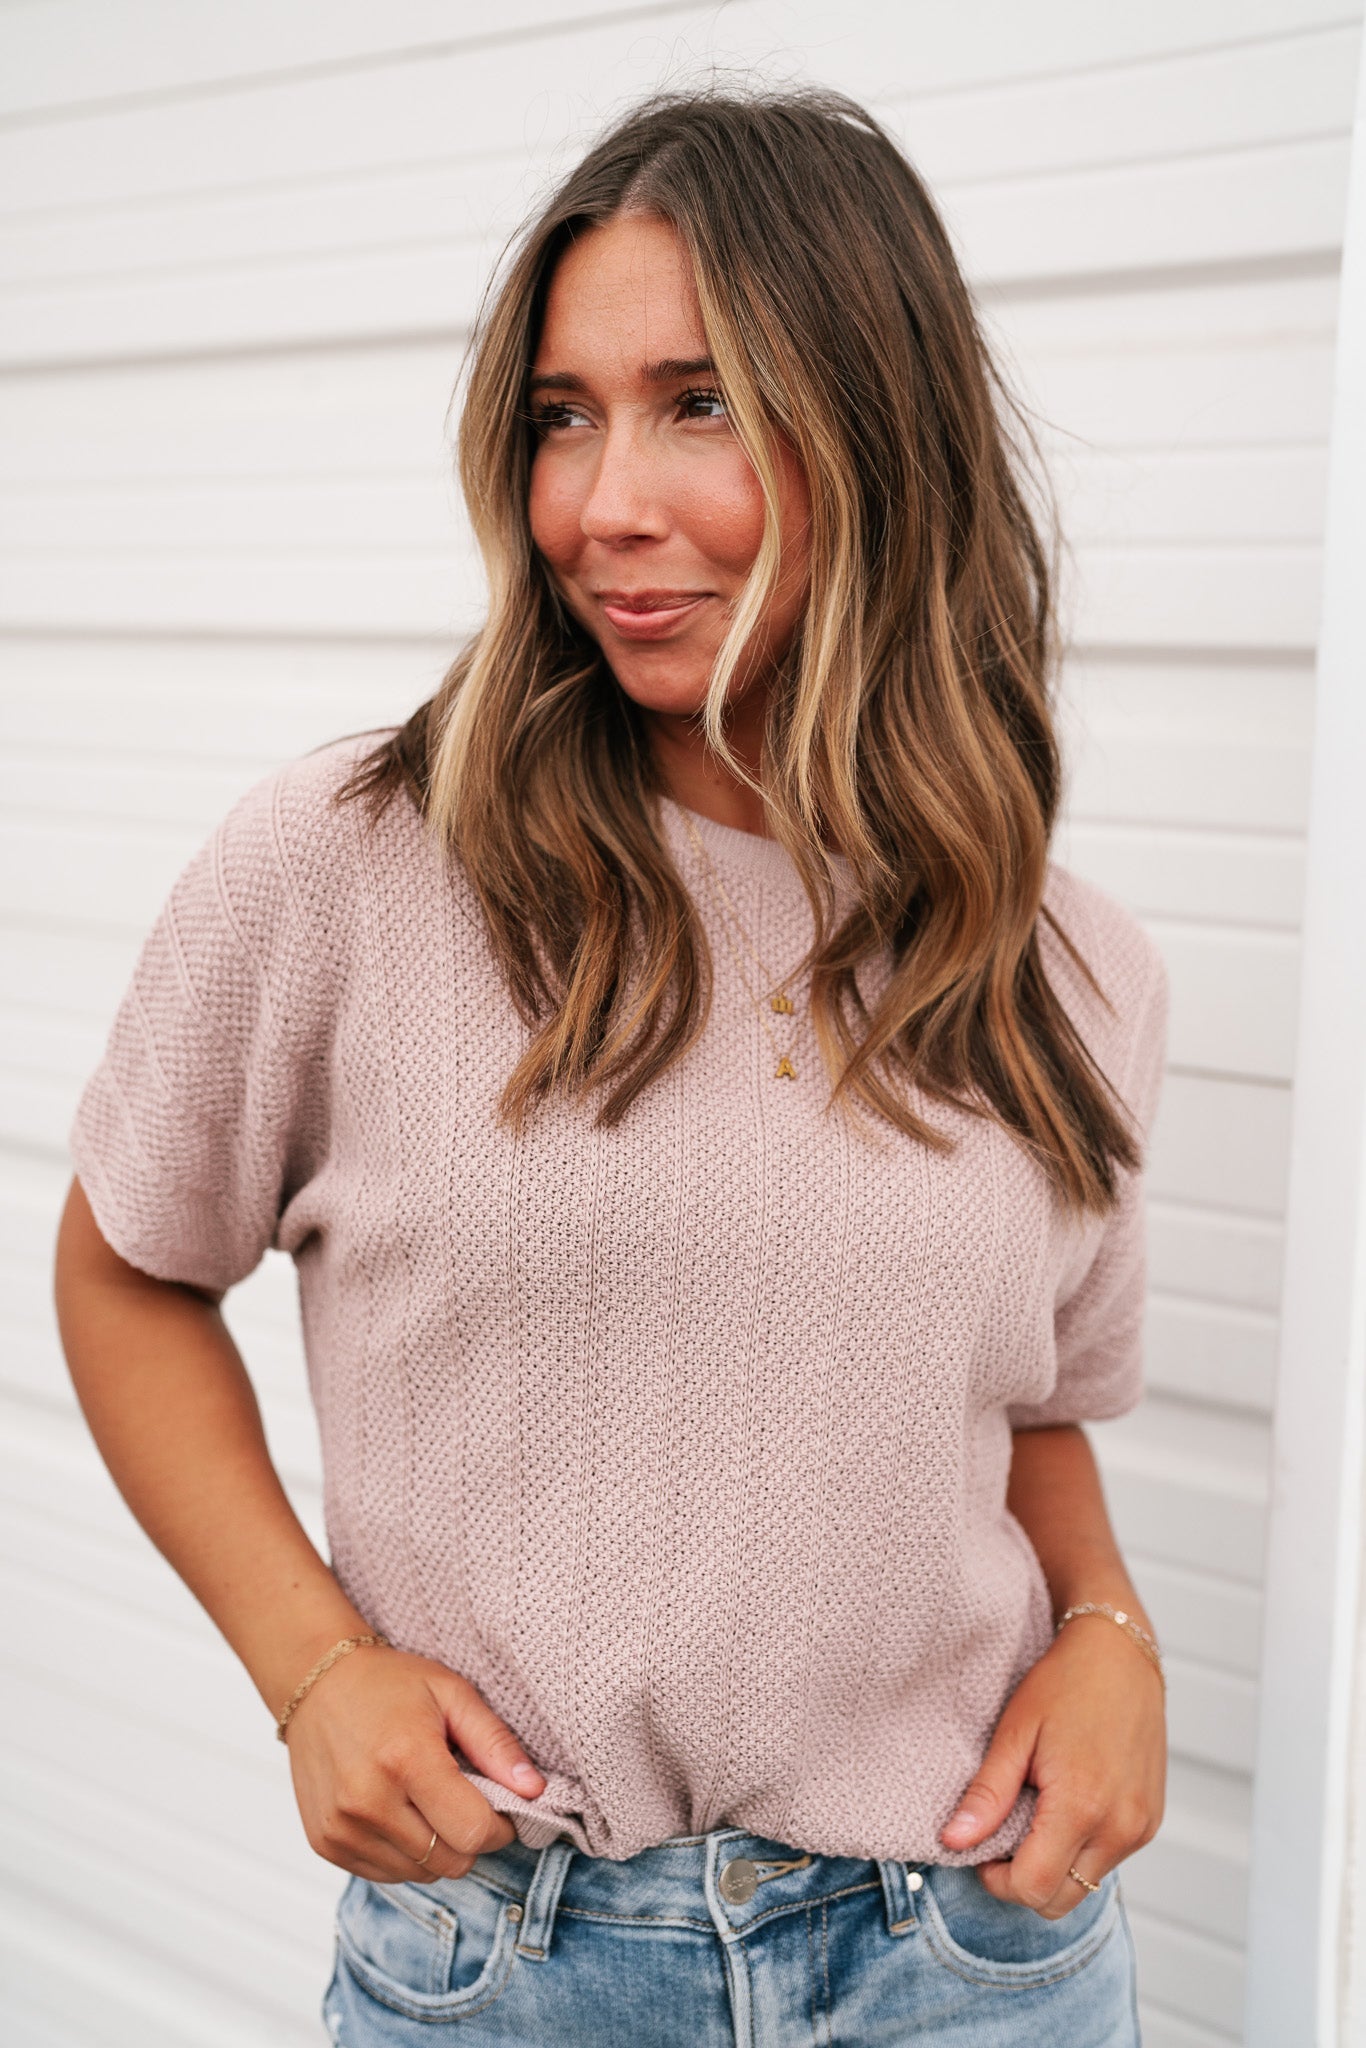 Easy Essential Sweater Top